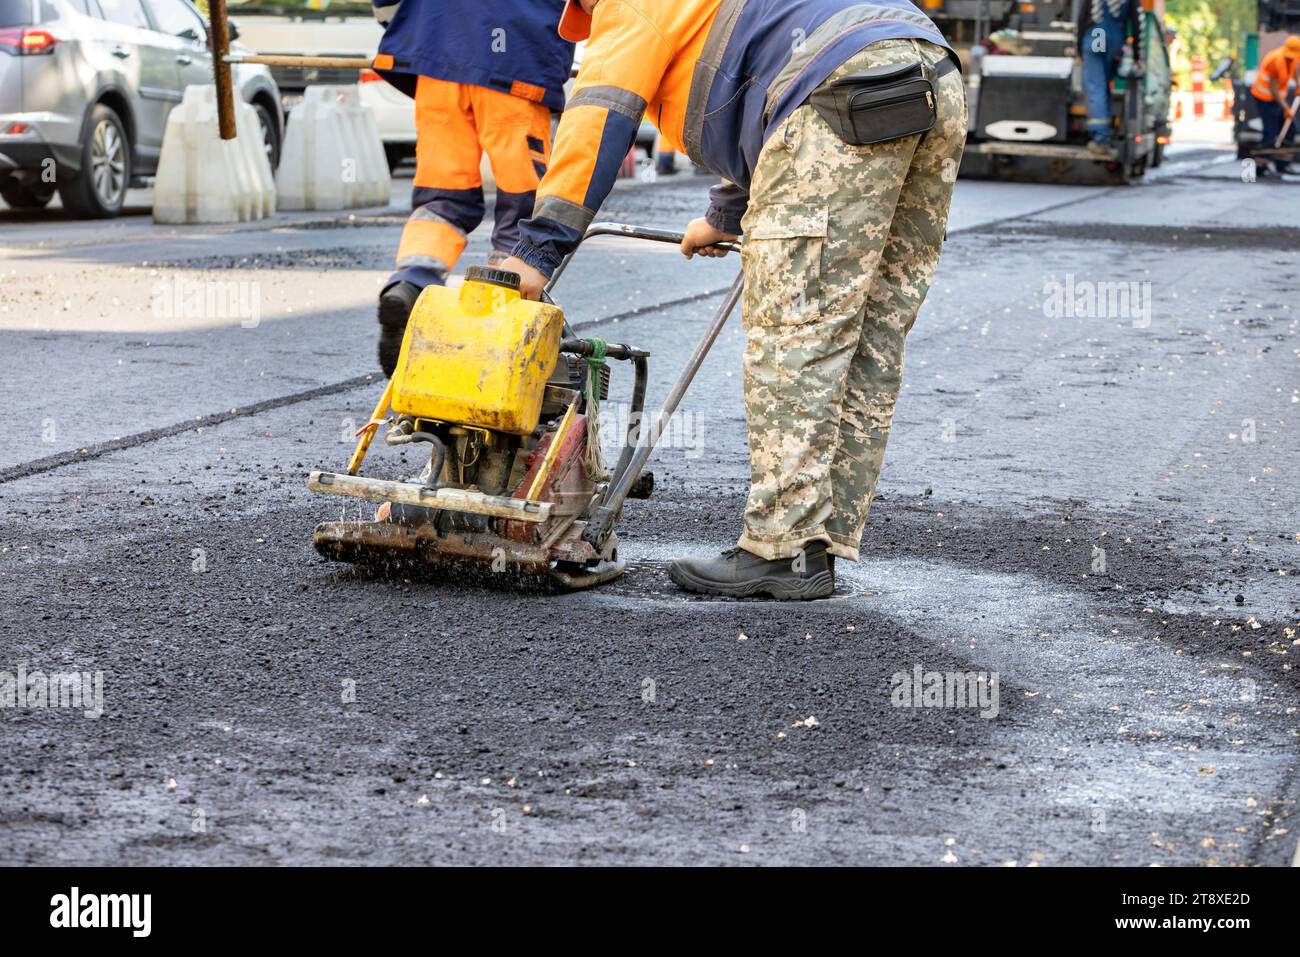 A road service worker compacts fresh asphalt on a section of road with a worn-out gasoline vibrating plate around a sewer manhole. Copy space. Stock Photo